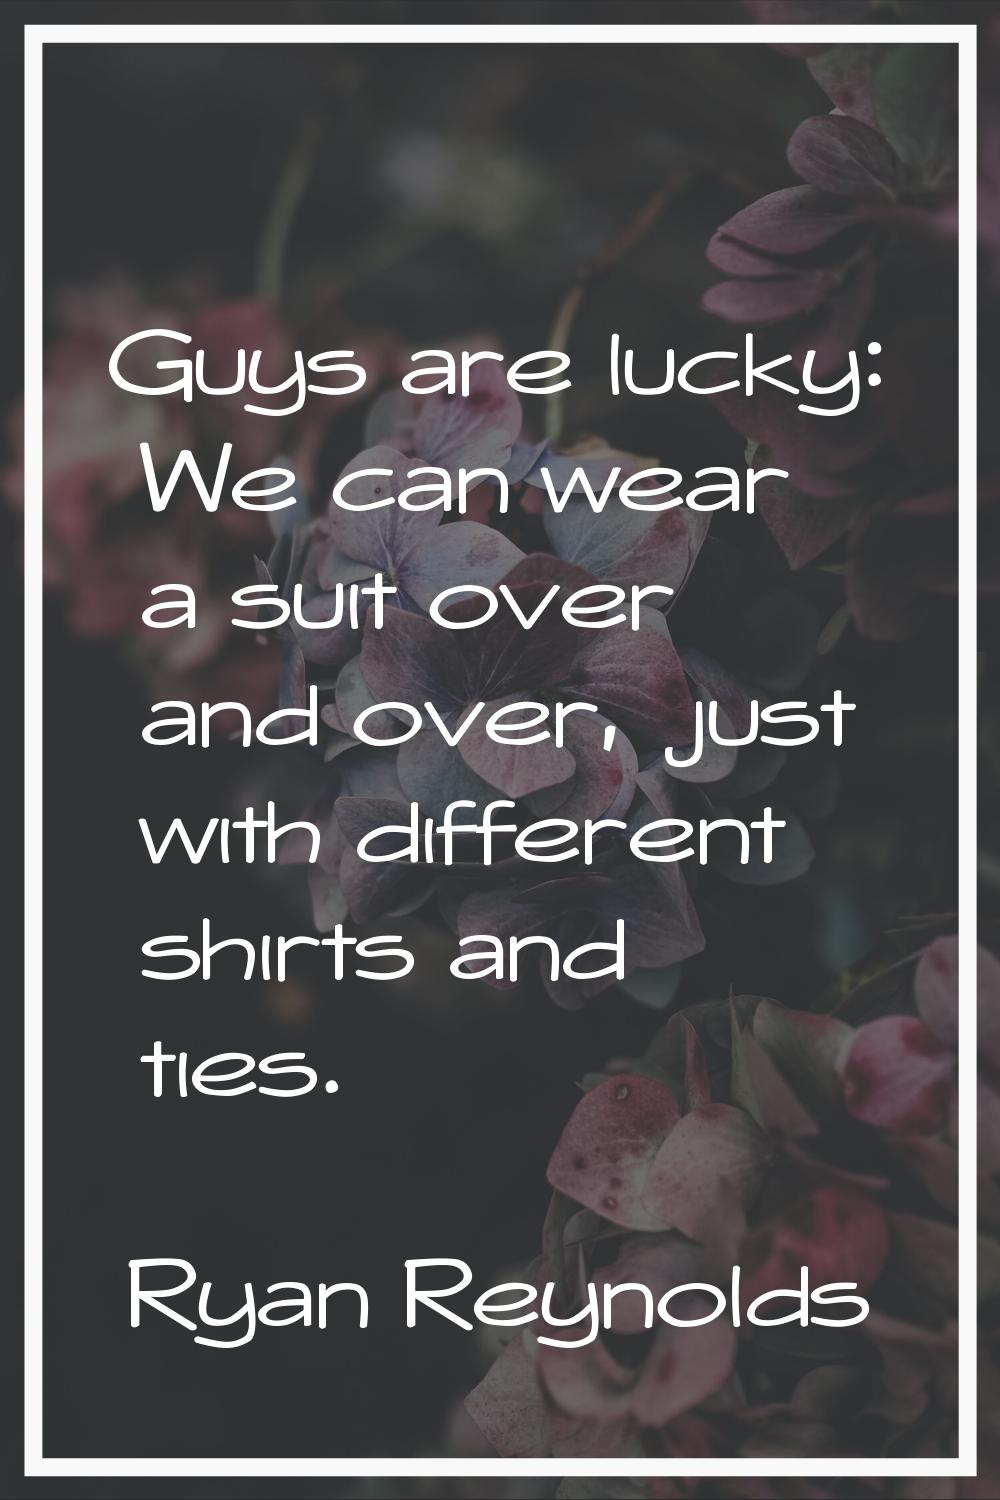 Guys are lucky: We can wear a suit over and over, just with different shirts and ties.